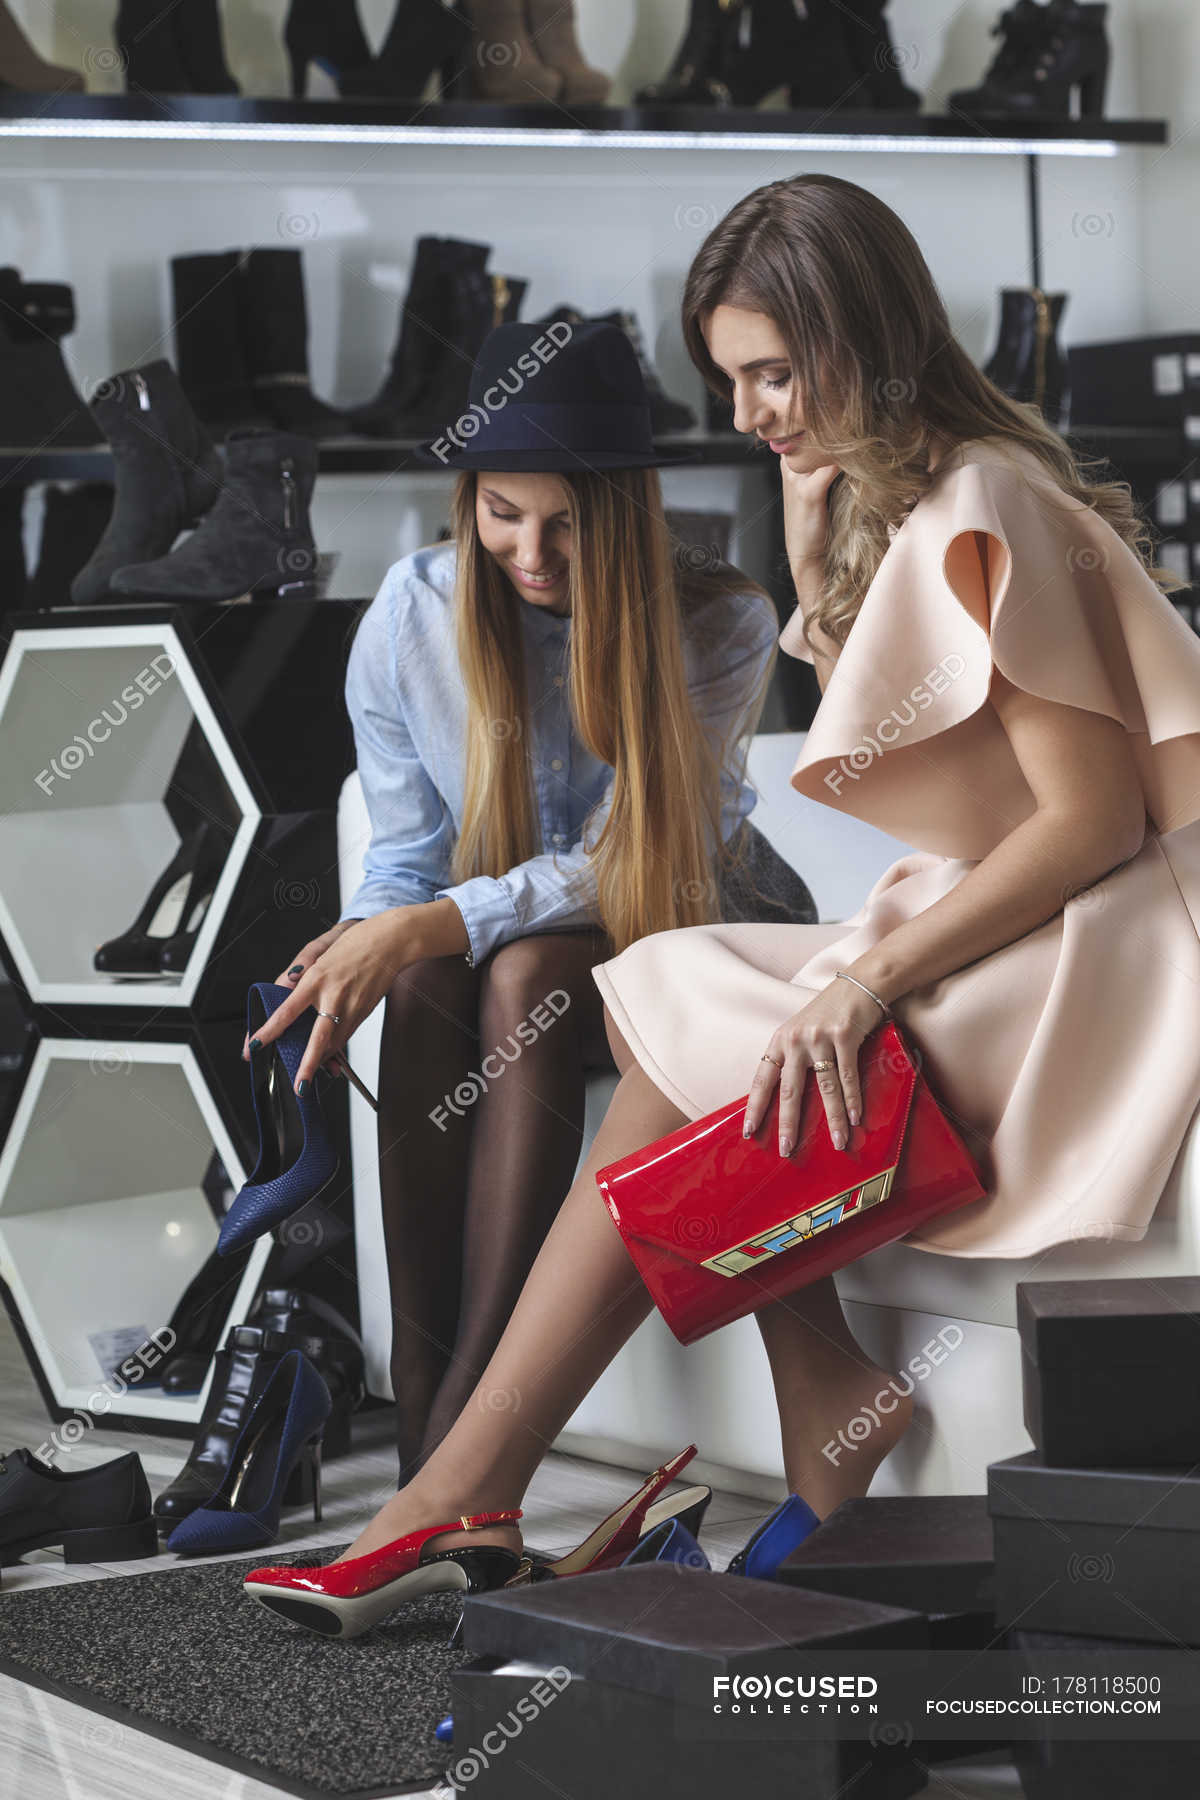 Female Friends Trying On High Heels At Store Buying Shelf